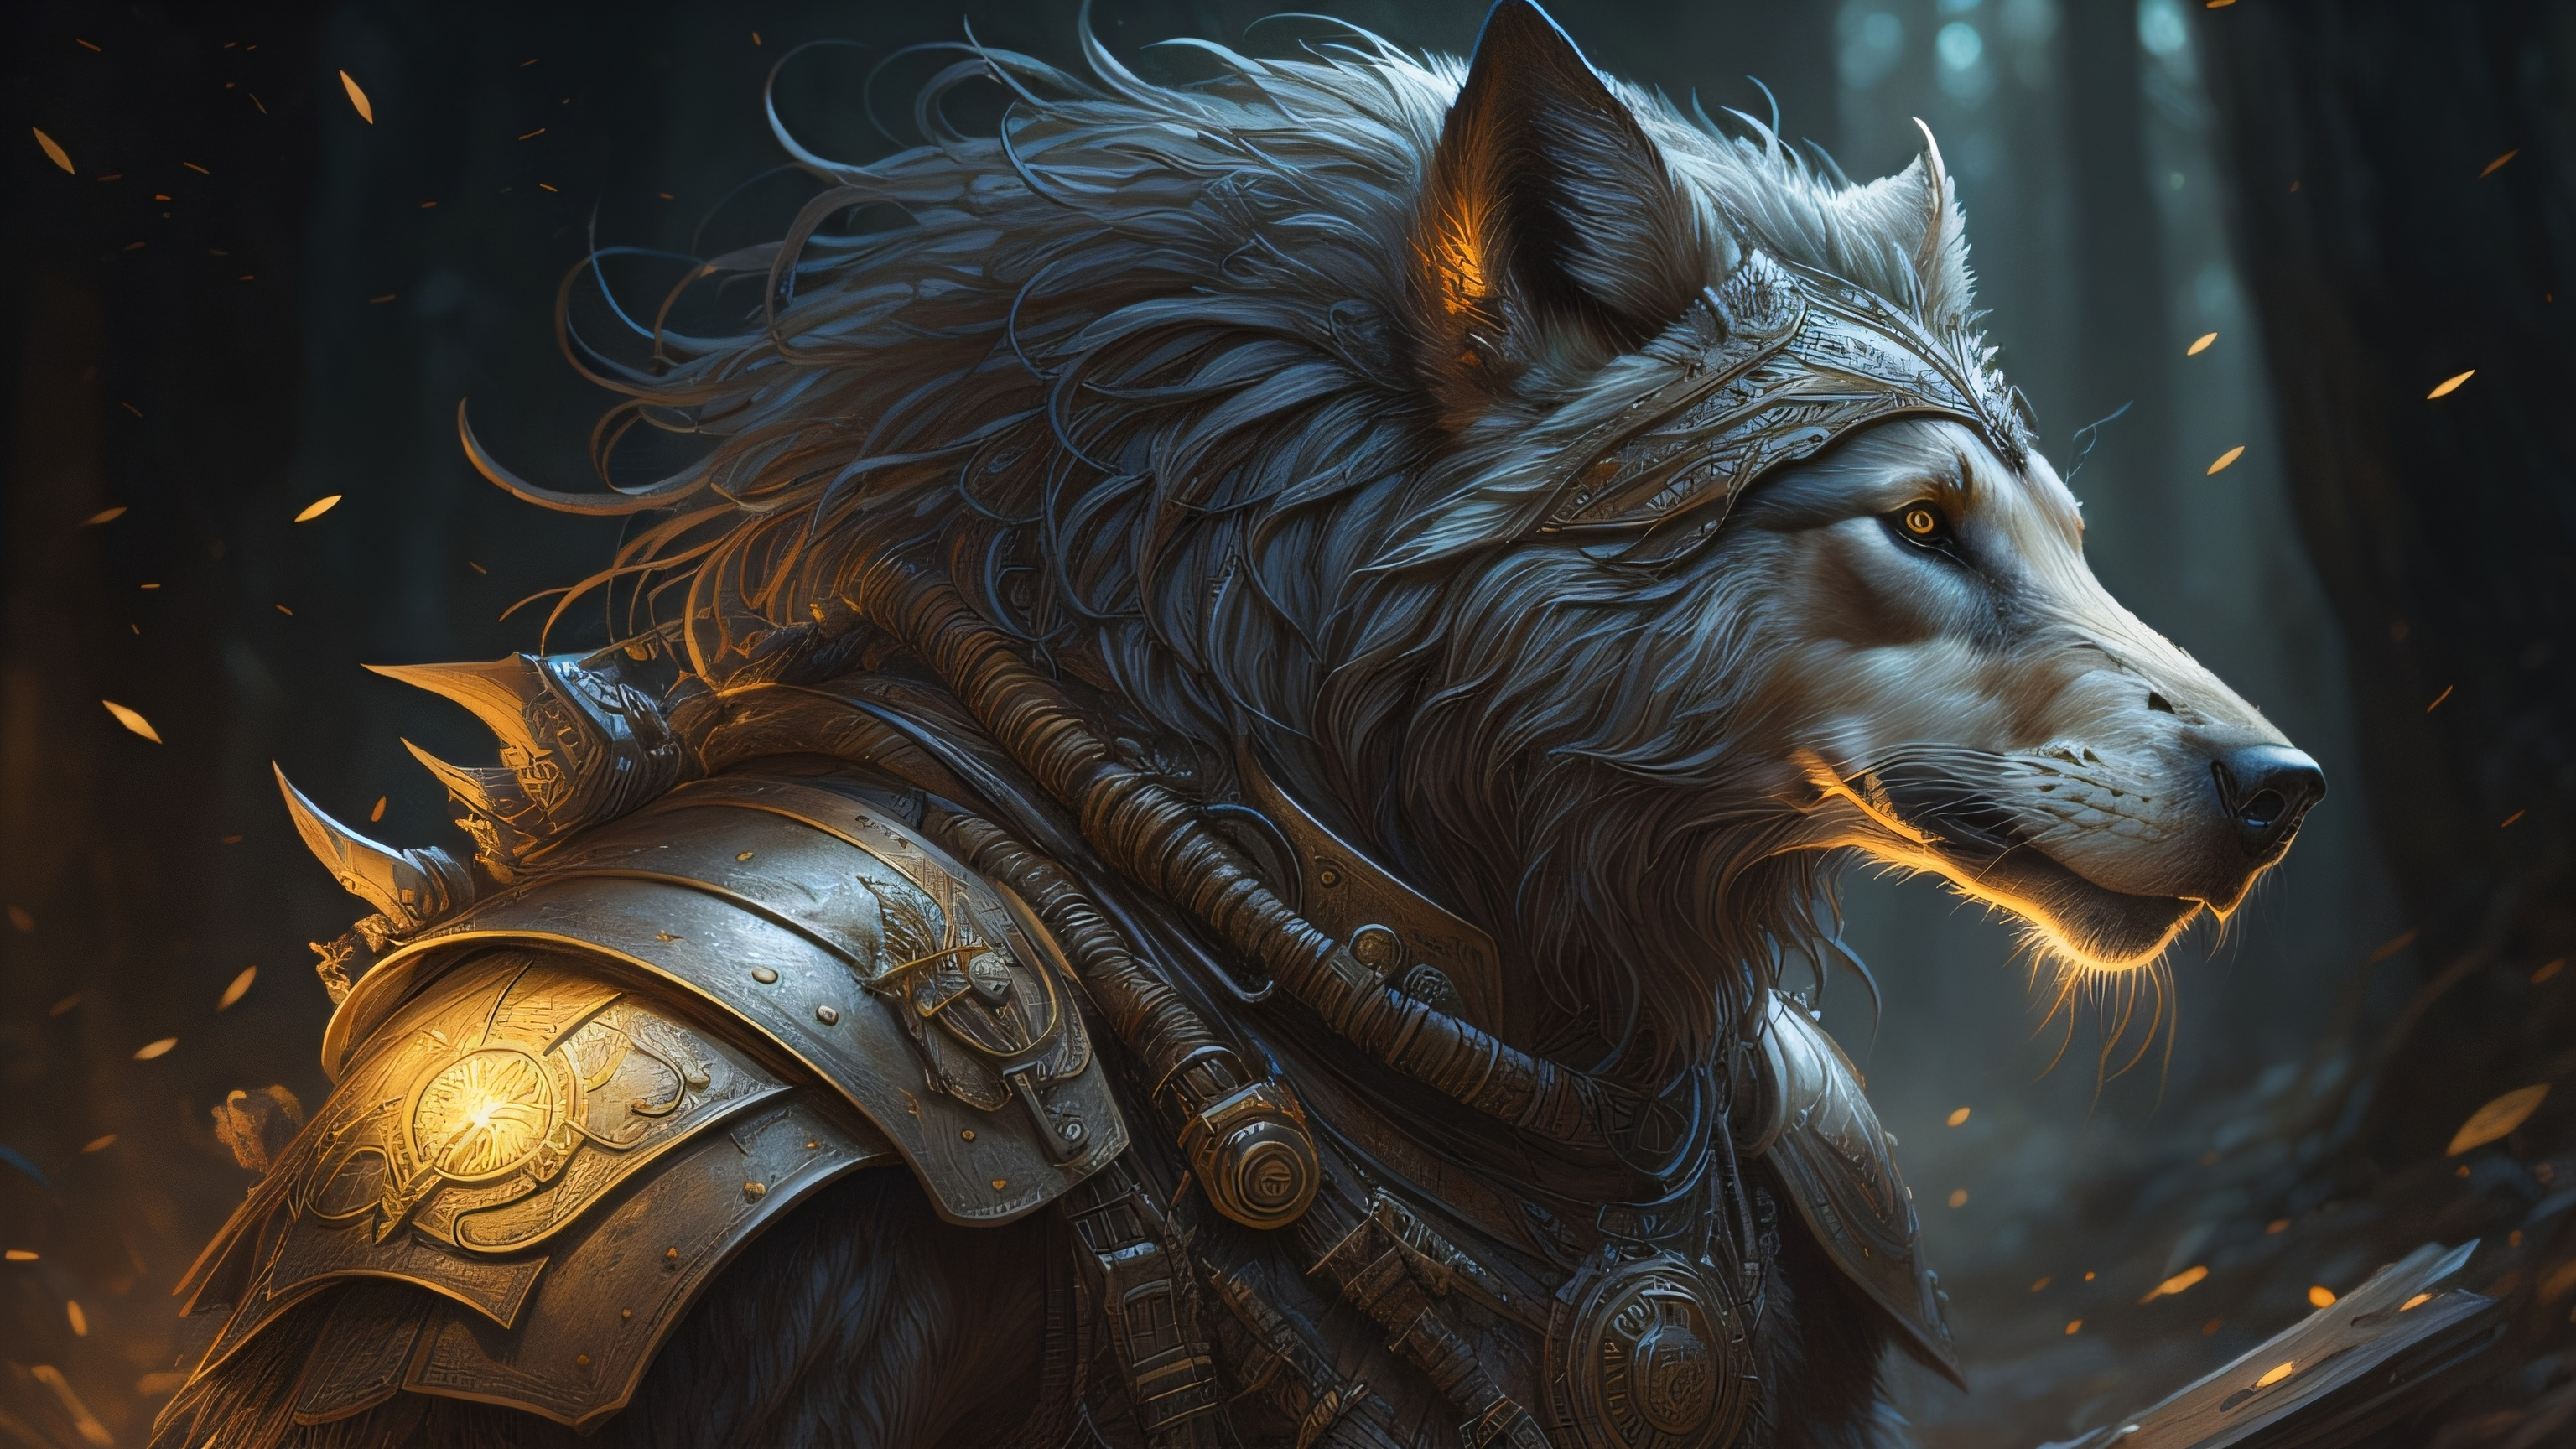 170+ Fantasy Wolf HD Wallpapers and Backgrounds